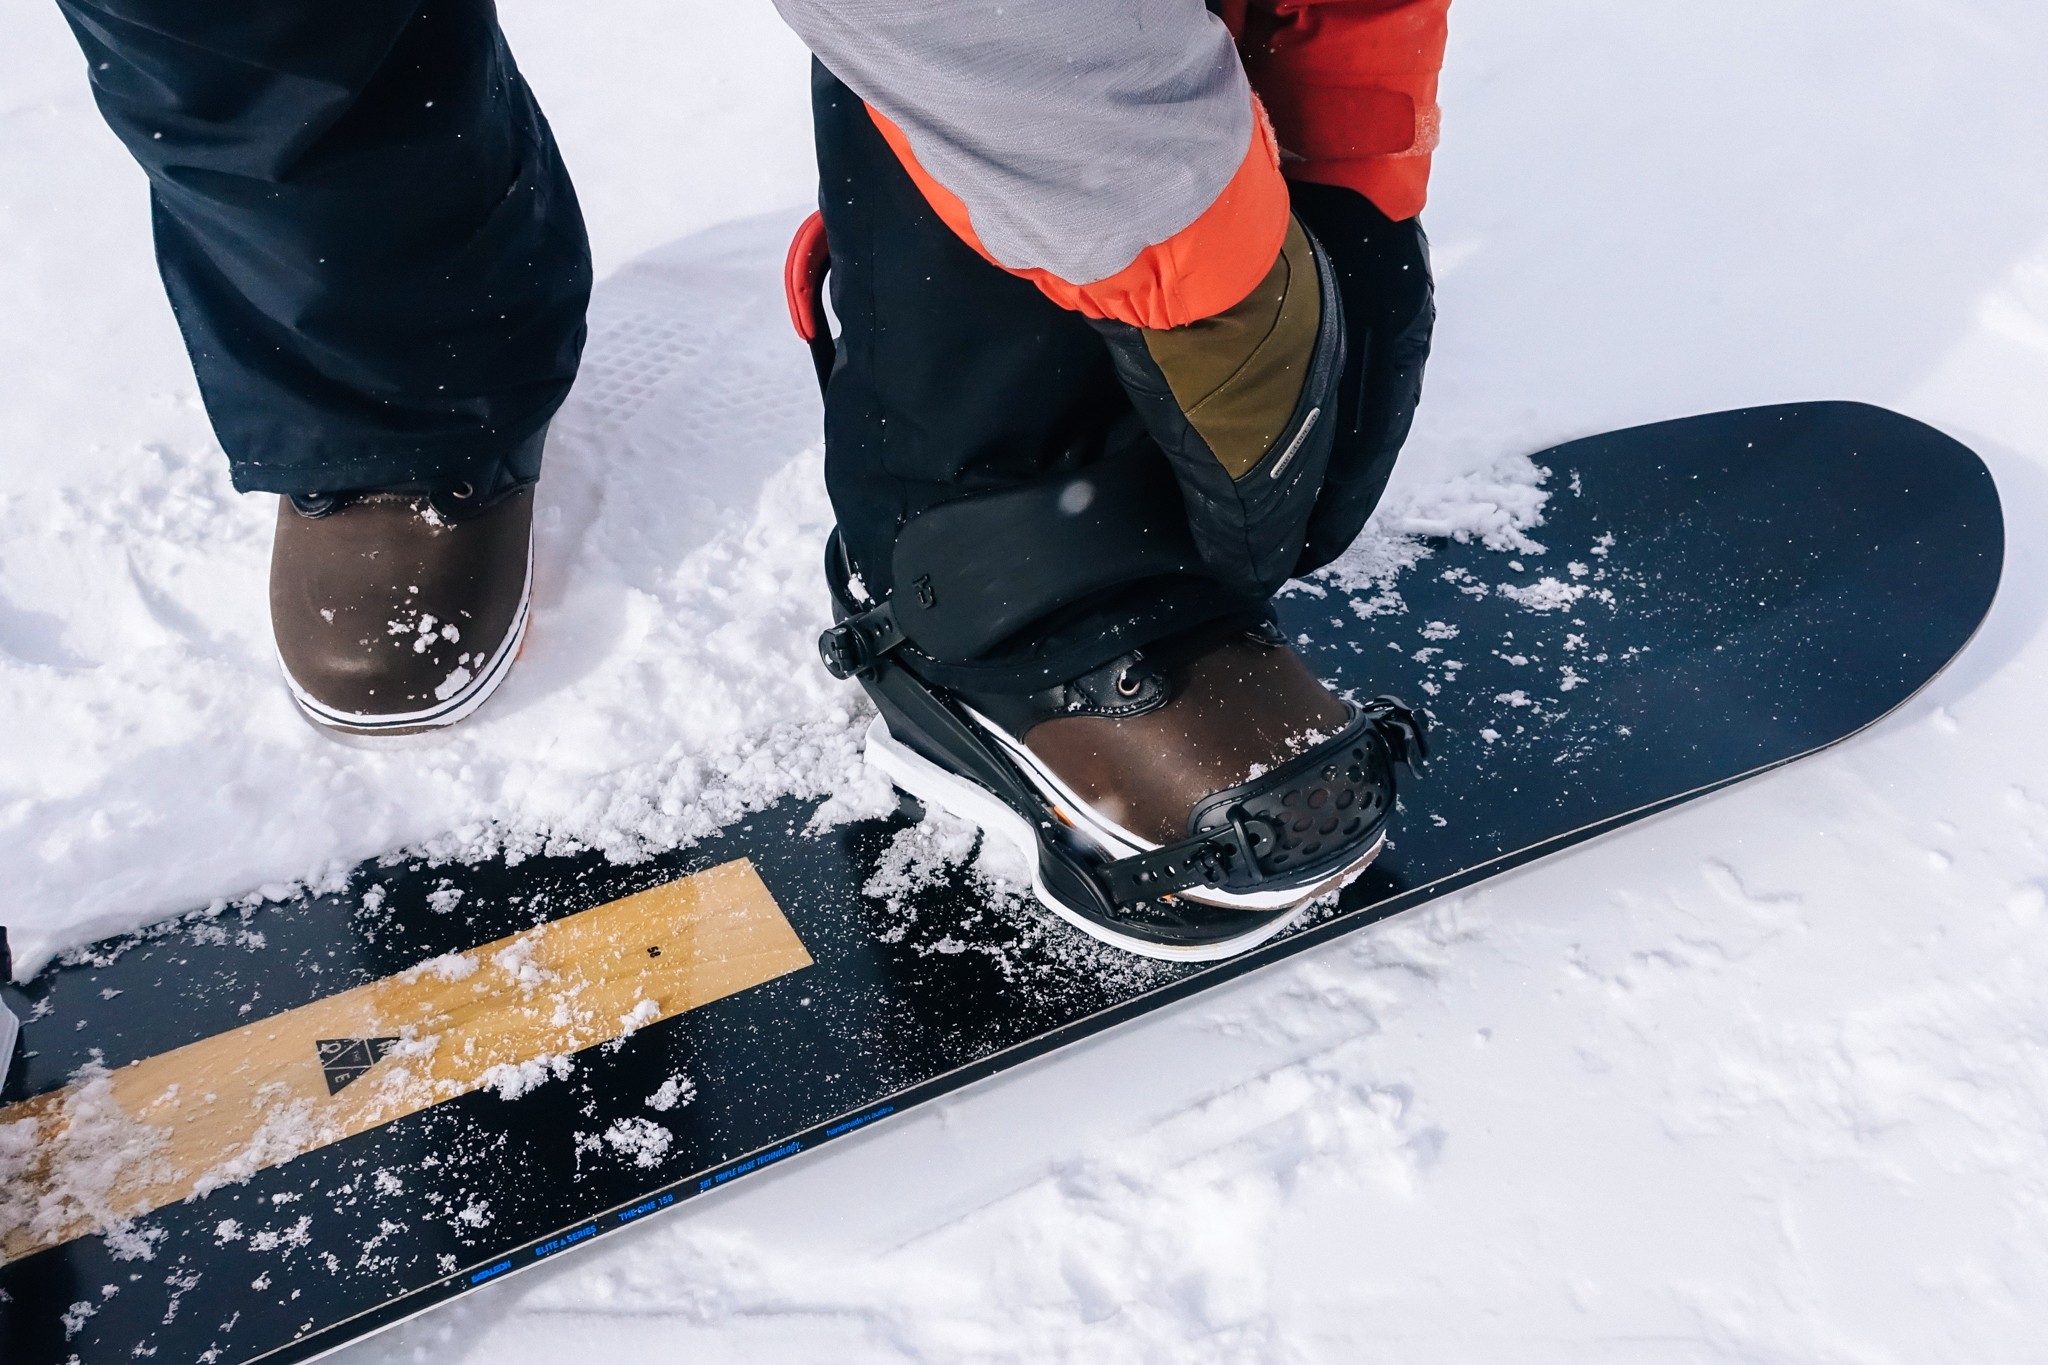 Just Our favorite new snowboards for so far – Snowboard Magazine